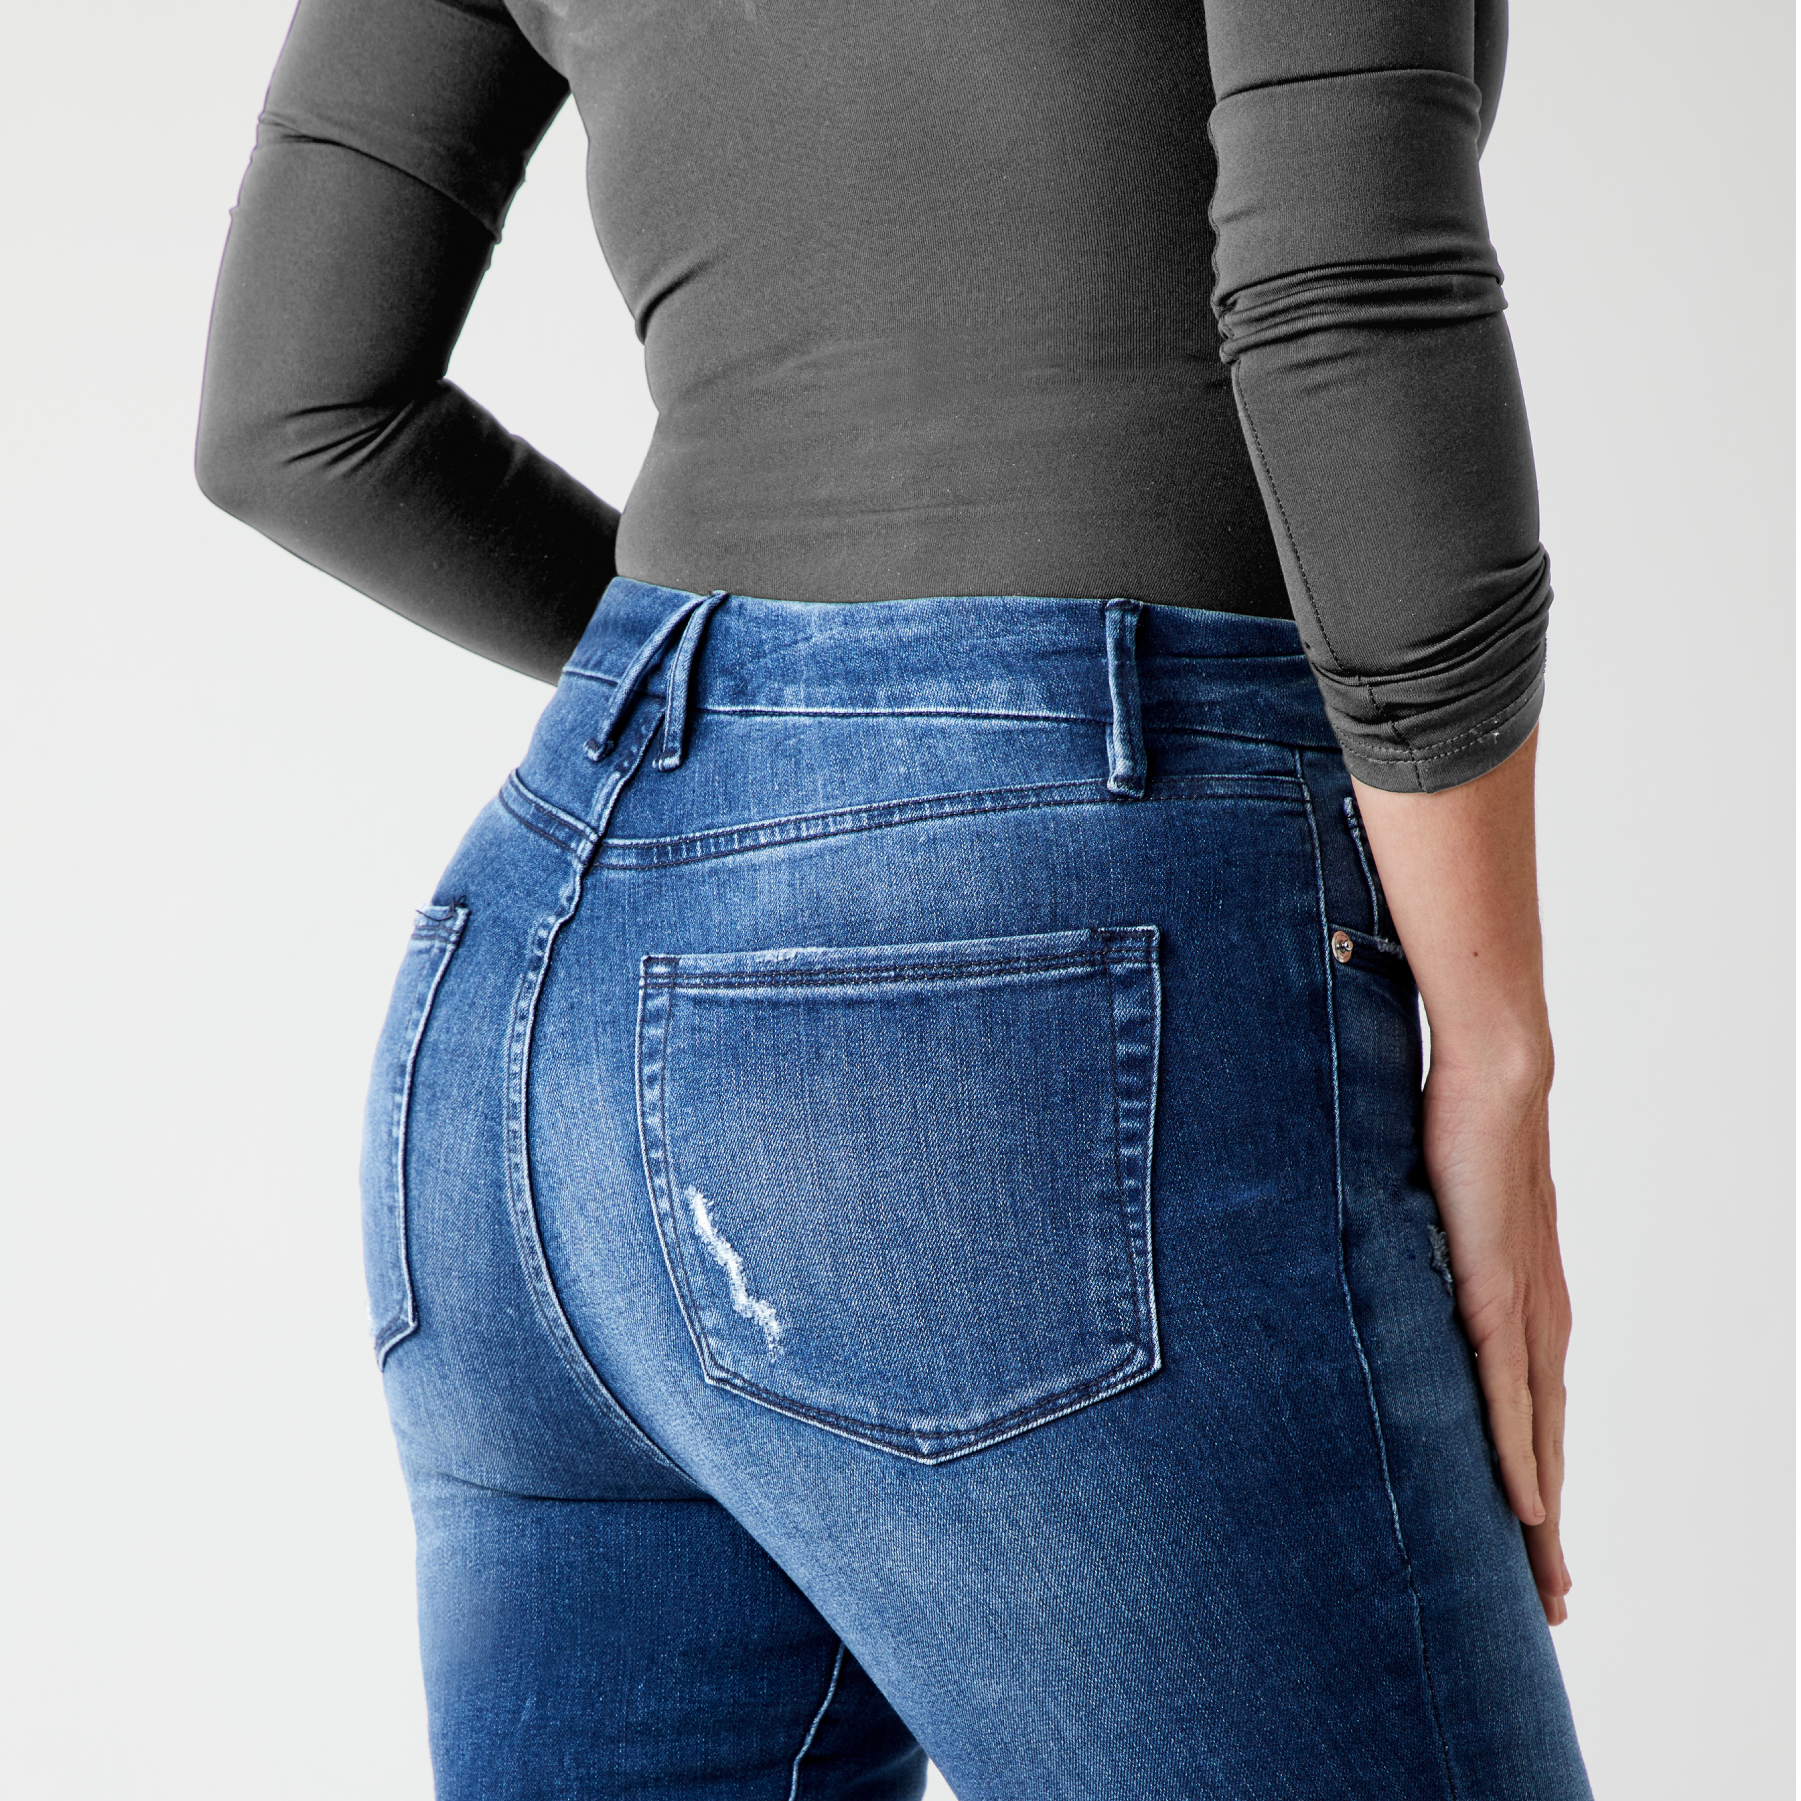 great fitting jeans